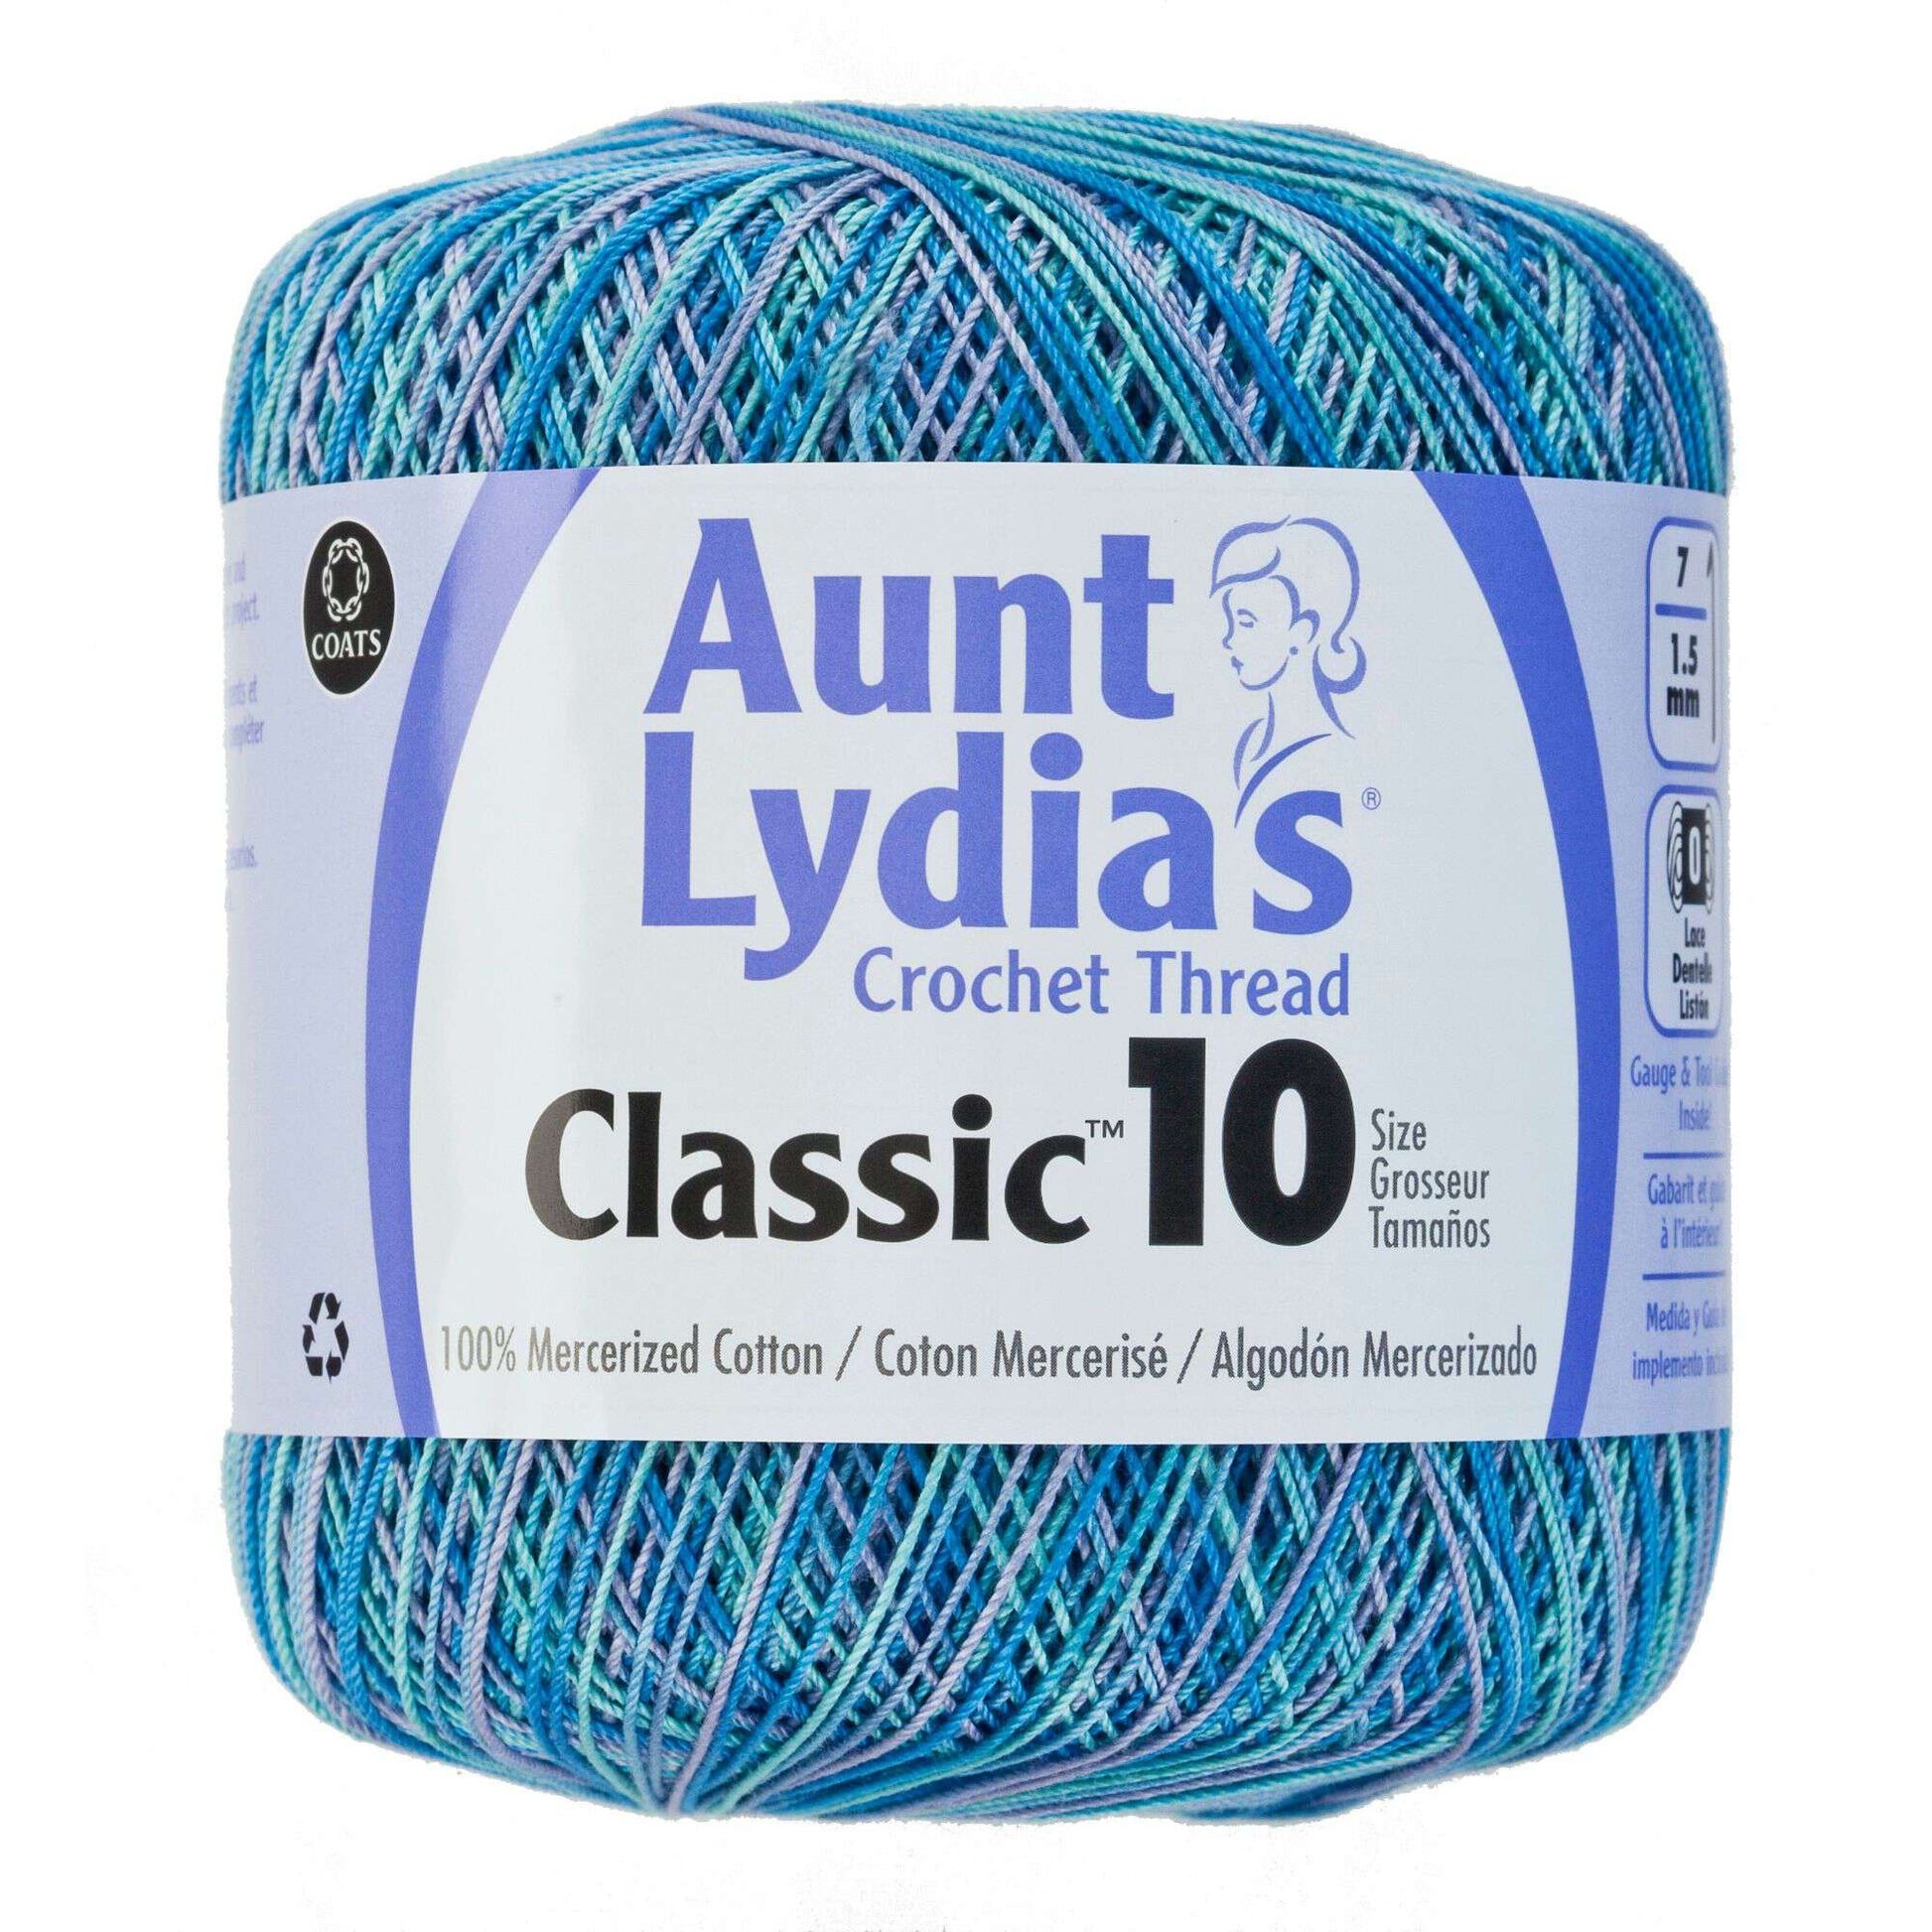 Aunt Lydias Crochet Thread Classic 10 for Bedspread,table Cloths Doilies  Apparel and Accessories 100% Mercerized Cotton 1000yds natural 